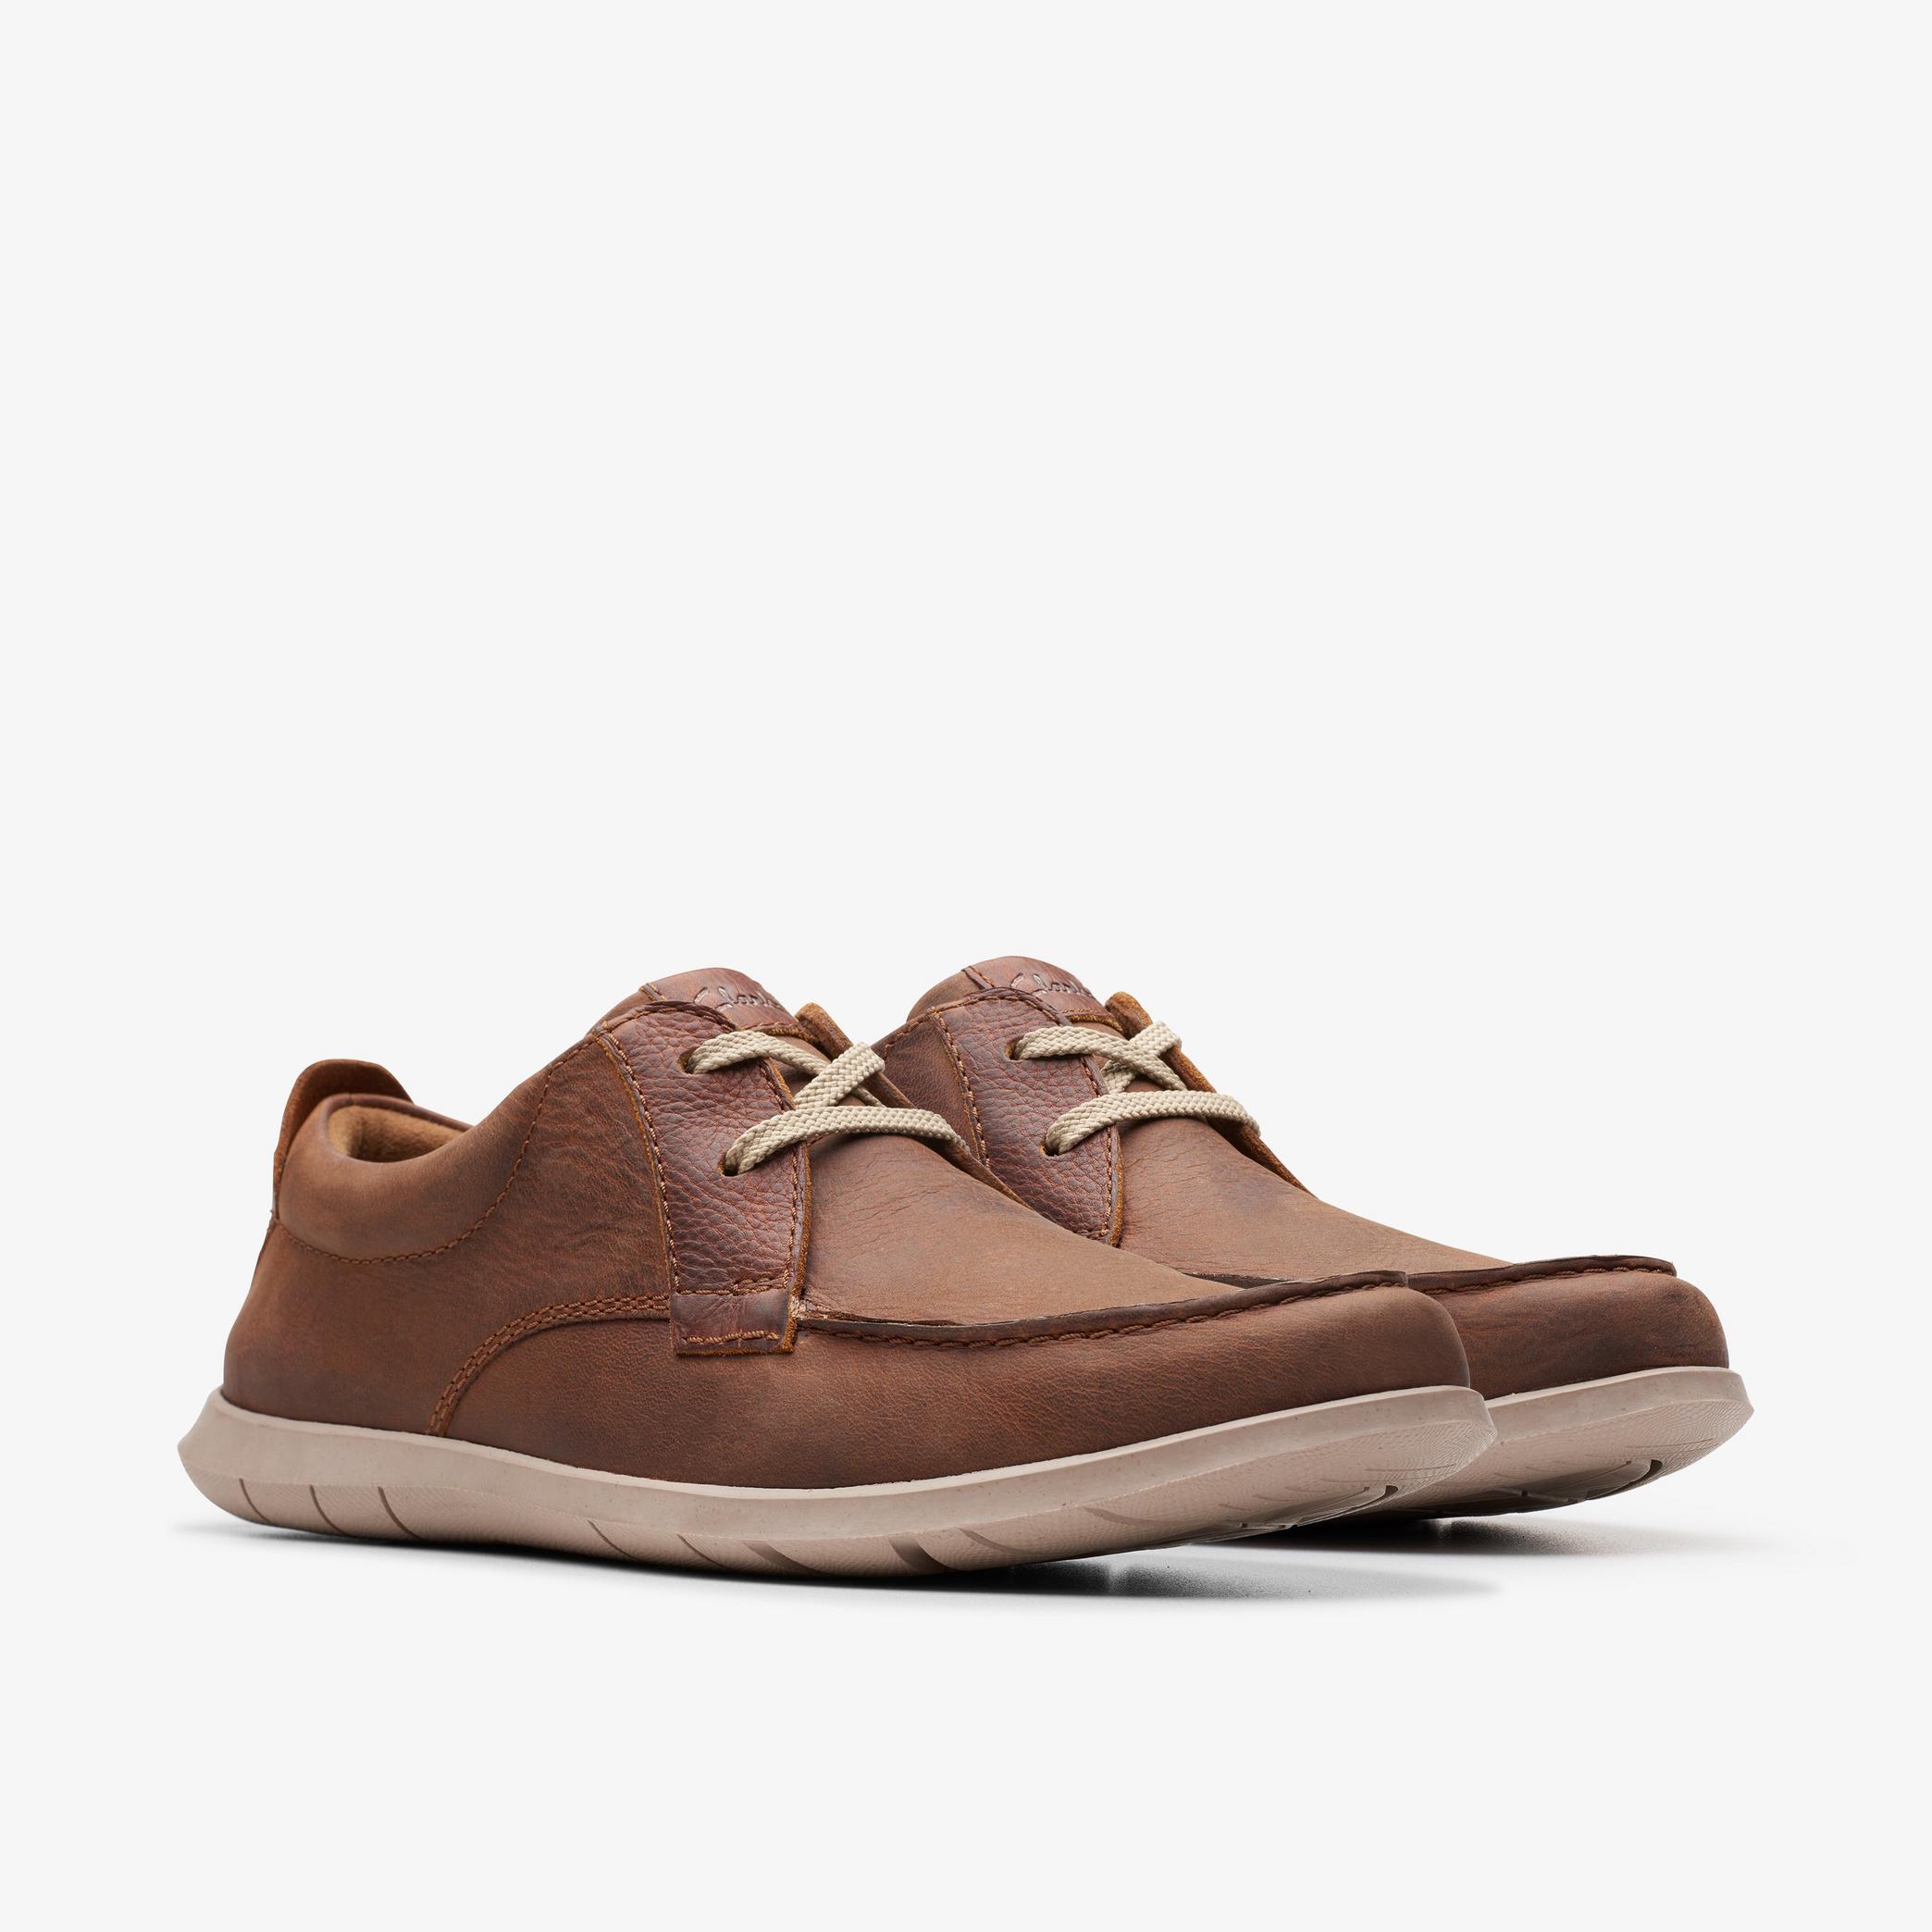 Flexway Lace Dark Tan Leather Boat Shoes, view 4 of 6